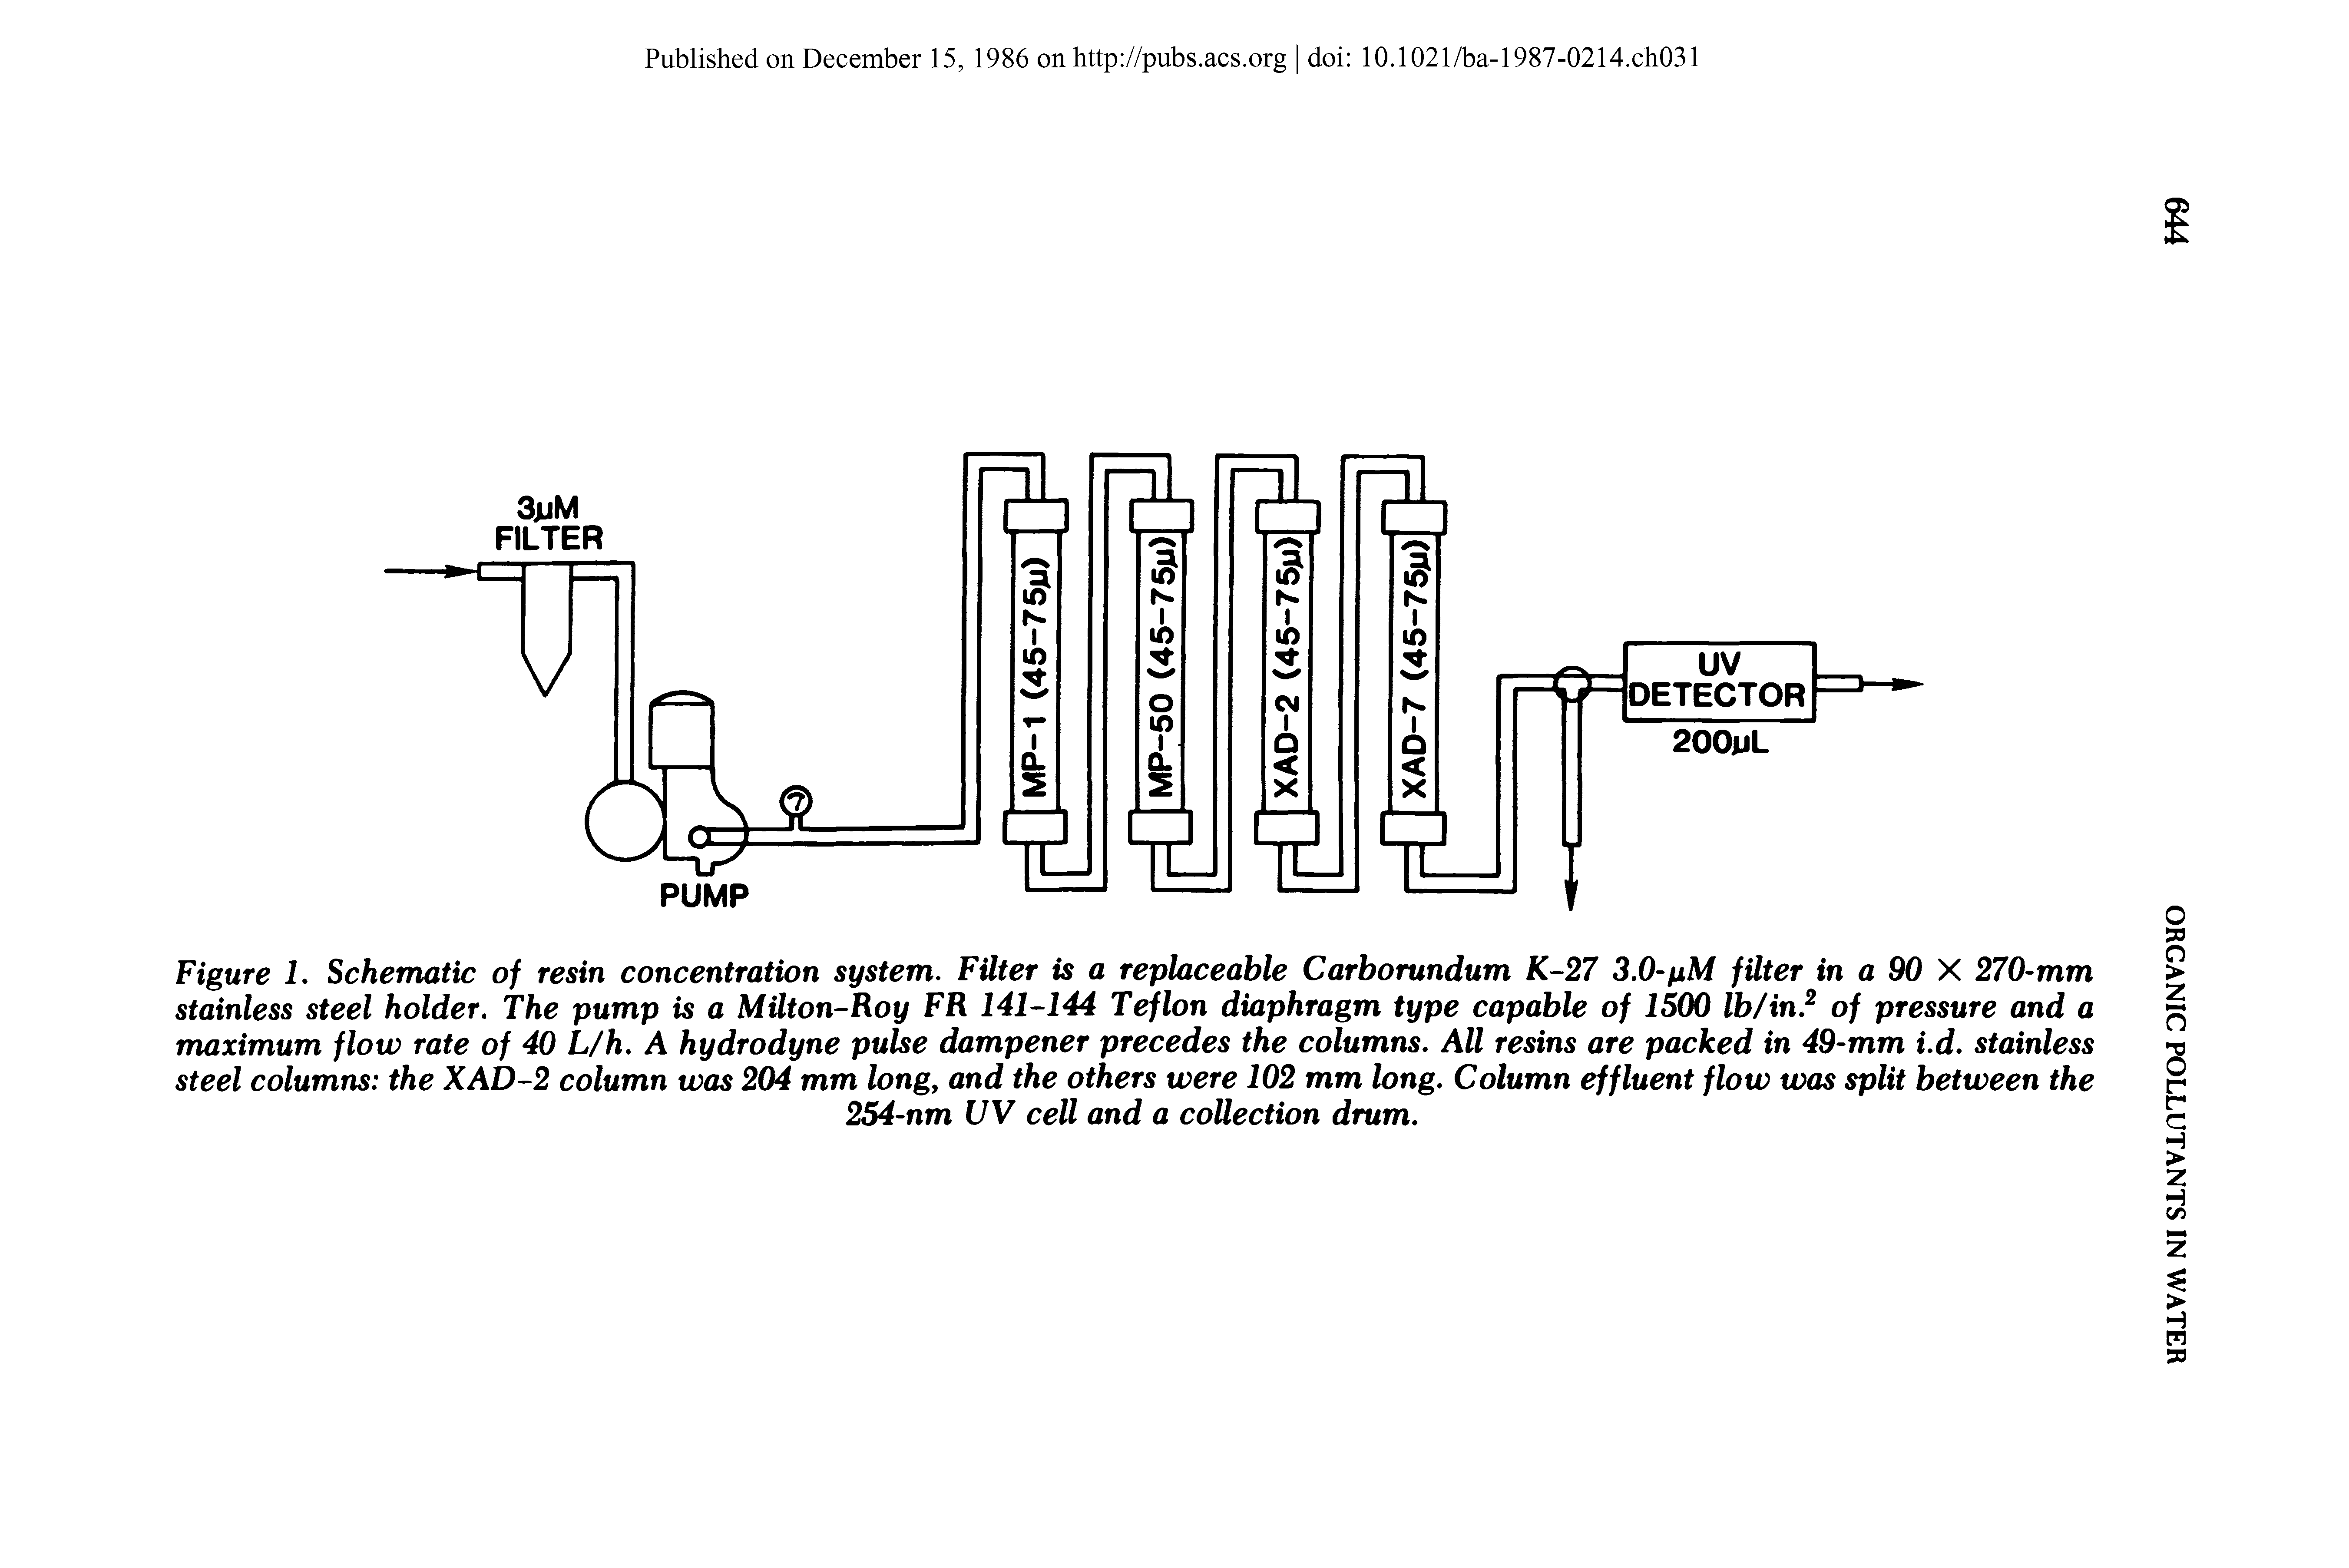 Figure 1. Schematic of resin concentration system. Filter is a replaceable Carborundum K-27 3.0-pM filter in a 90 X 270-mm stainless steel holder. The pump is a MUton-Roy FR 141-144 Teflon diaphragm type capable of 1500 lb/in.2 of pressure and a maximum flow rate of 40 L/h. A hydrodyne pulse dampener precedes the columns. All resins are packed in 49-mm i.d. stainless steel columns the XAD-2 column was 204 mm long, and the others were 102 mm long. Column effluent flow was split between the...